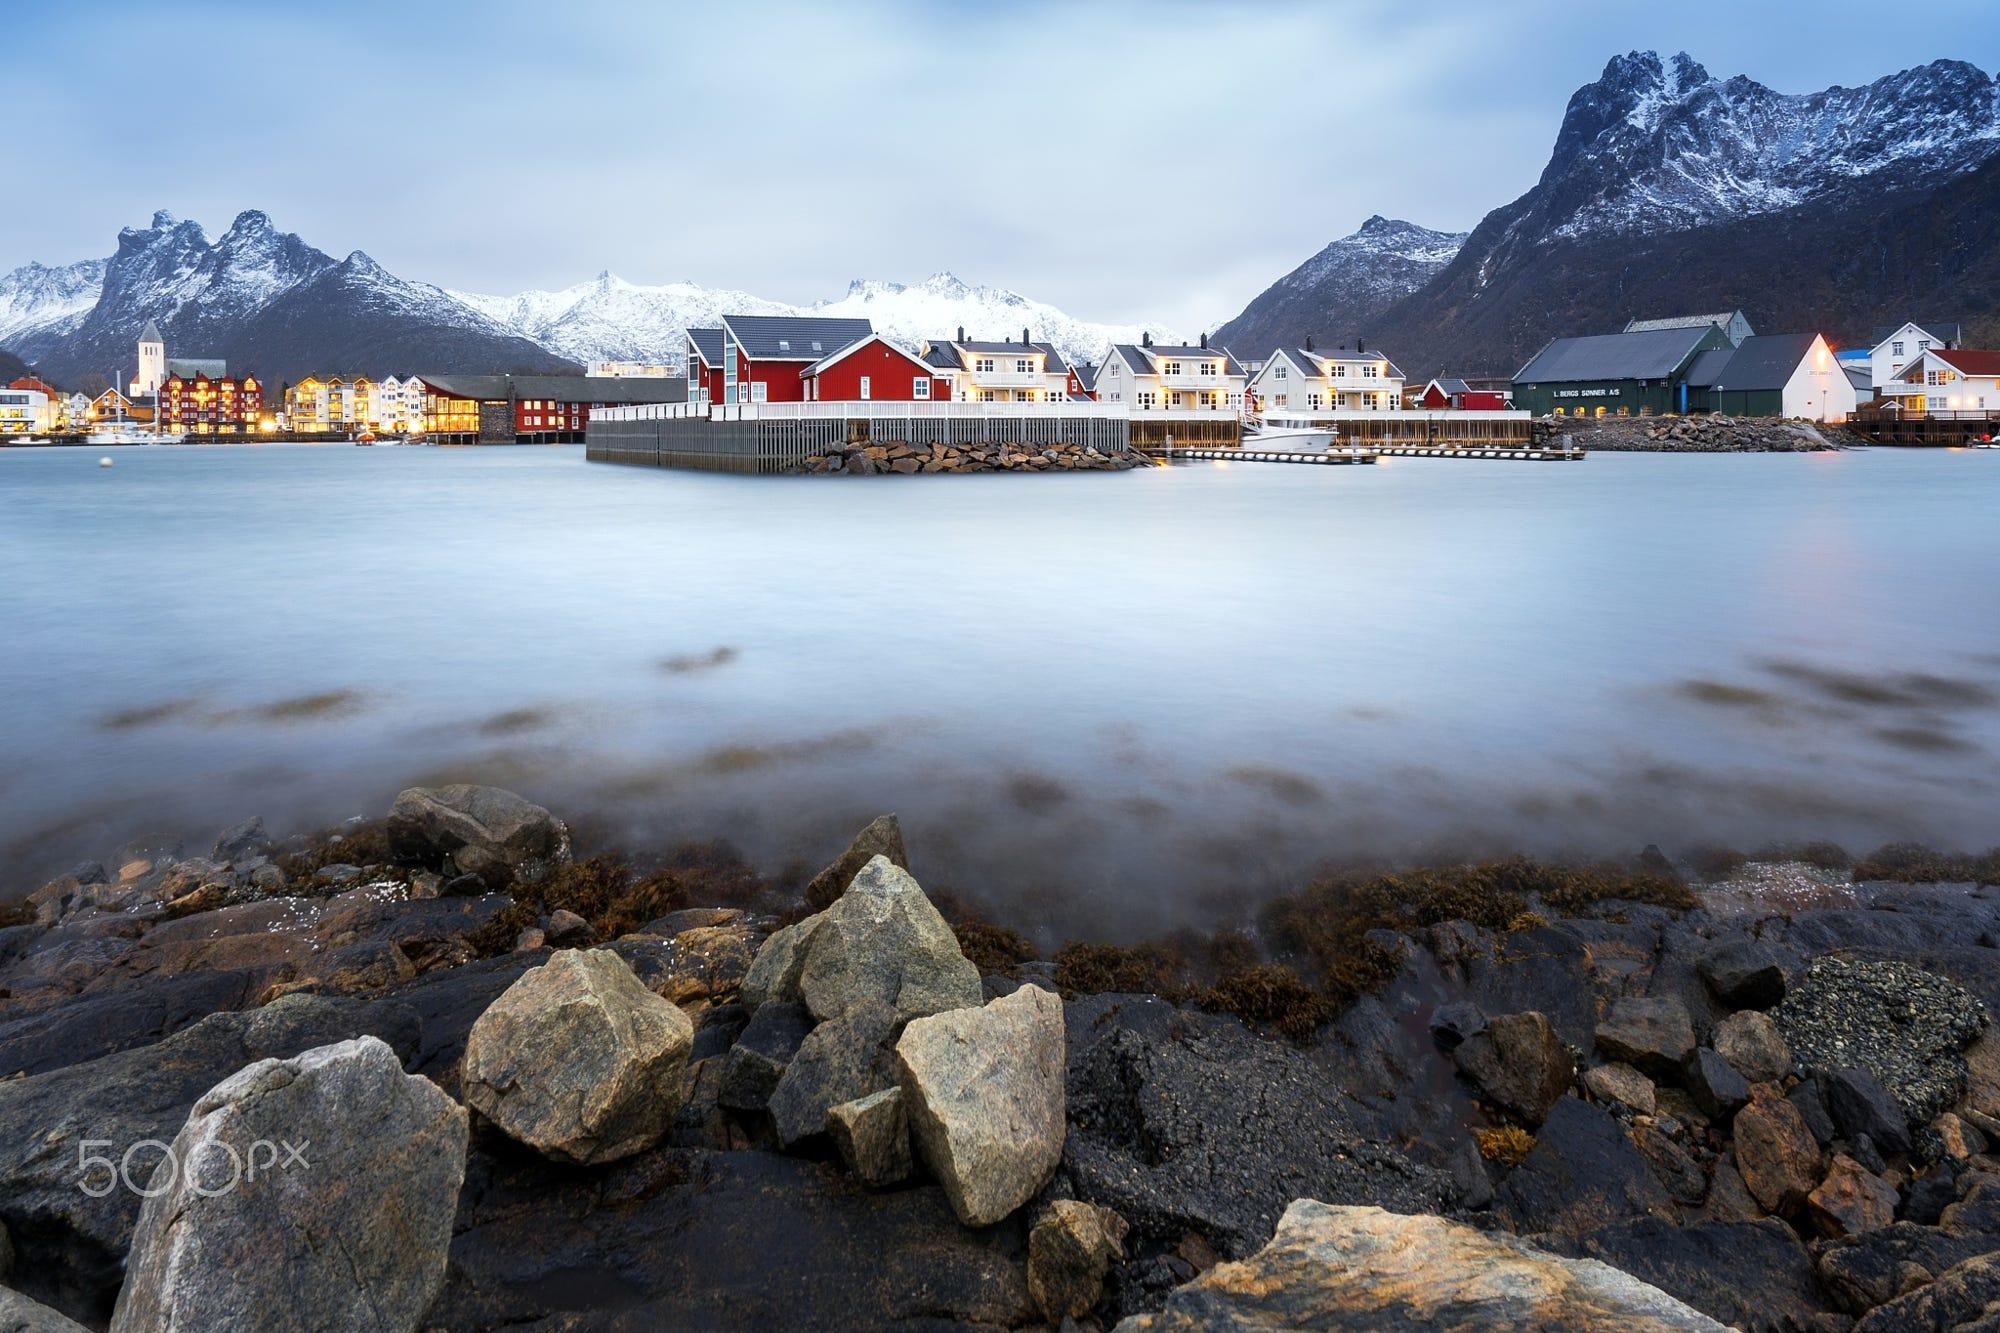 Tranquility in Svolvaer